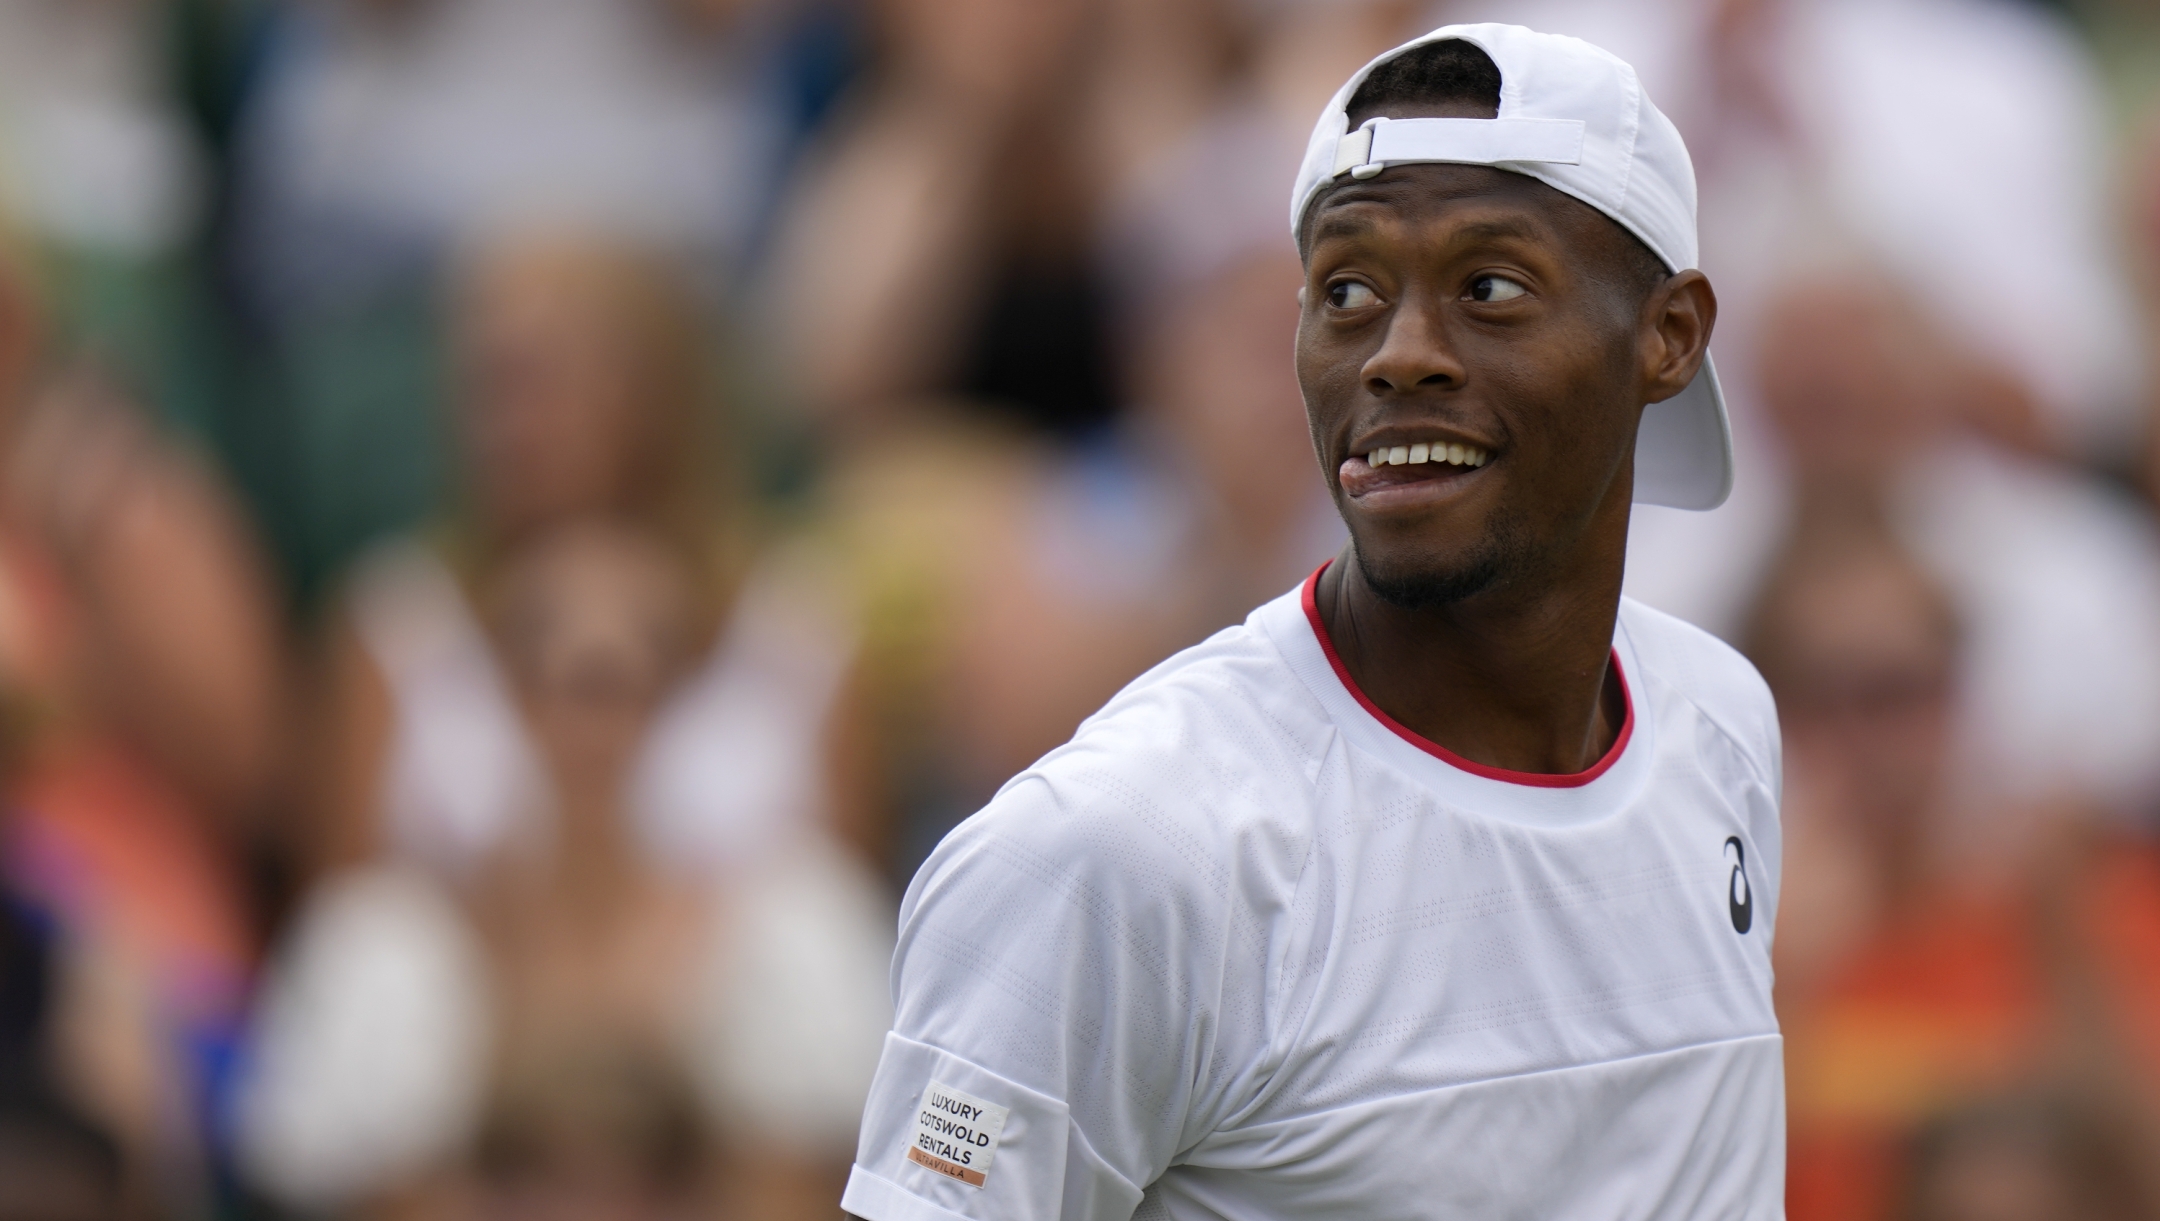 Christopher Eubanks of the US reacts as he plays Stefanos Tsitsipas of Greece in a men's singles match on day eight of the Wimbledon tennis championships in London, Monday, July 10, 2023. (AP Photo/Alastair Grant)